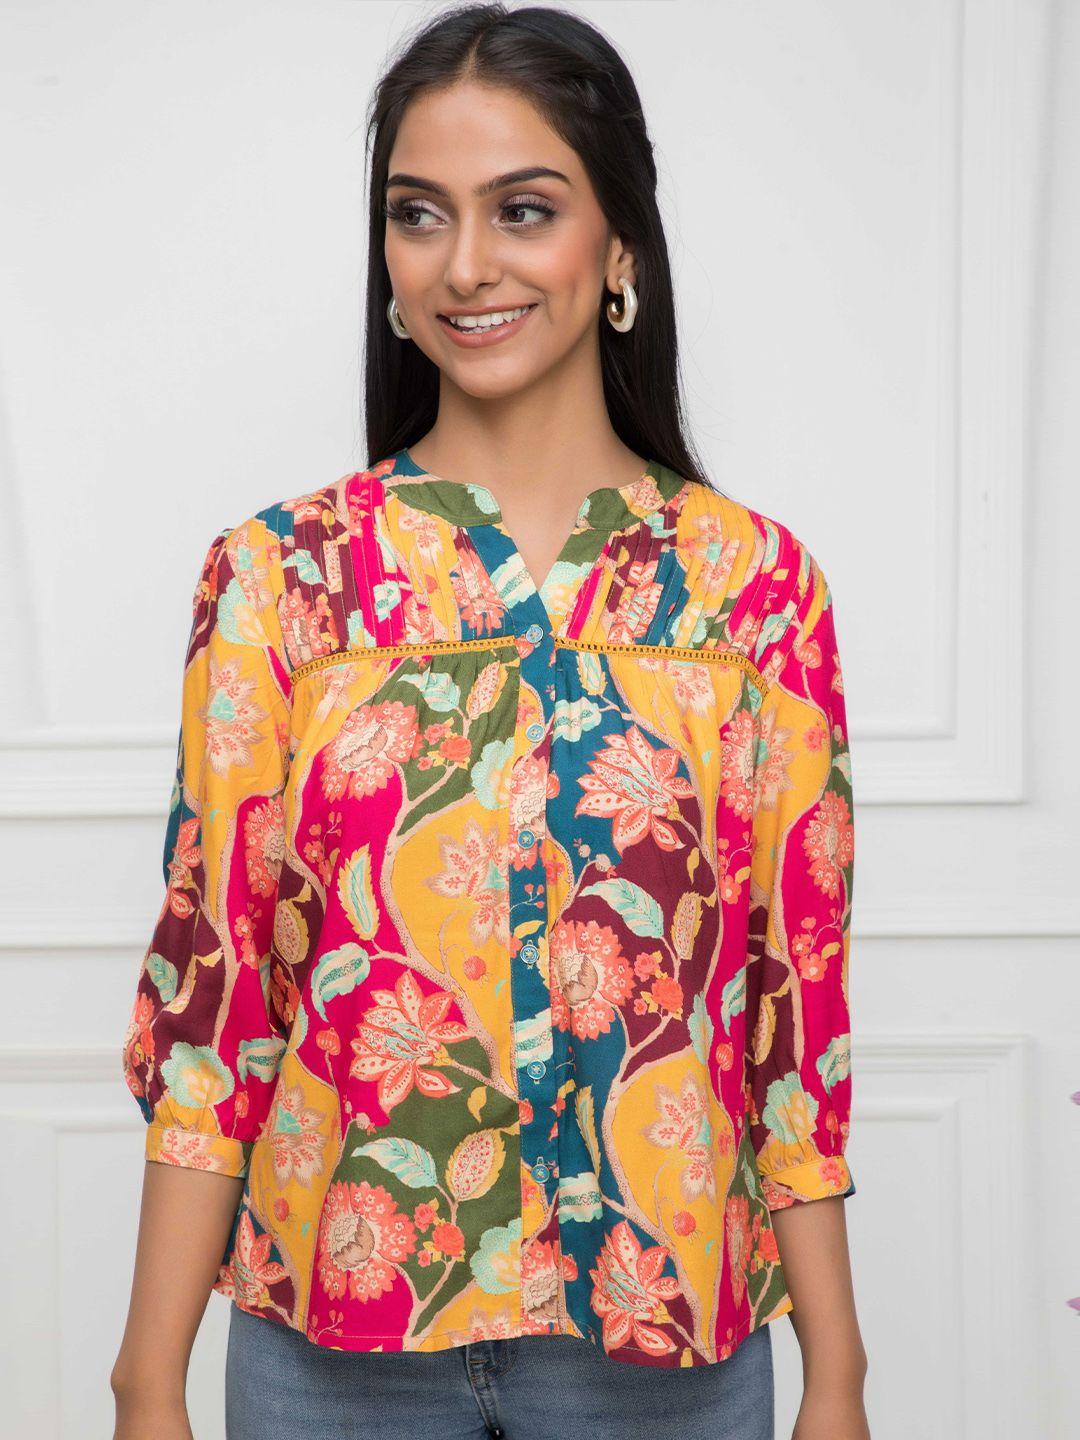 dressberry yellow floral print cotton shirt style top